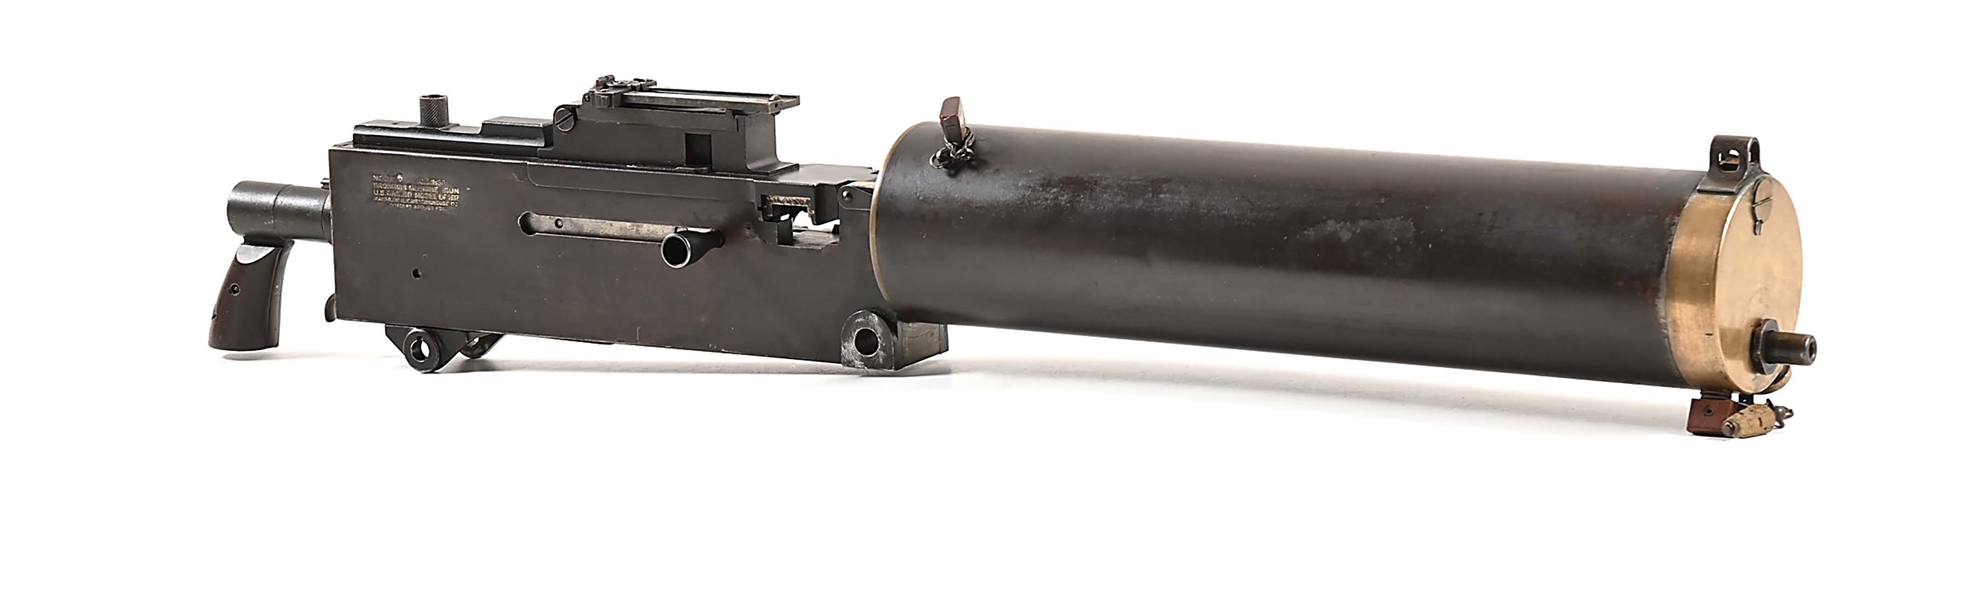 (N) EXCEPTIONAL CONDITION ORIGINAL LOW SERIAL NUMBER UNMODIFIED WESTINGHOUSE MANUFACTURED BROWNING MODEL 1917 WATER COOLED MACHINE GUN (CURIO AND RELIC).